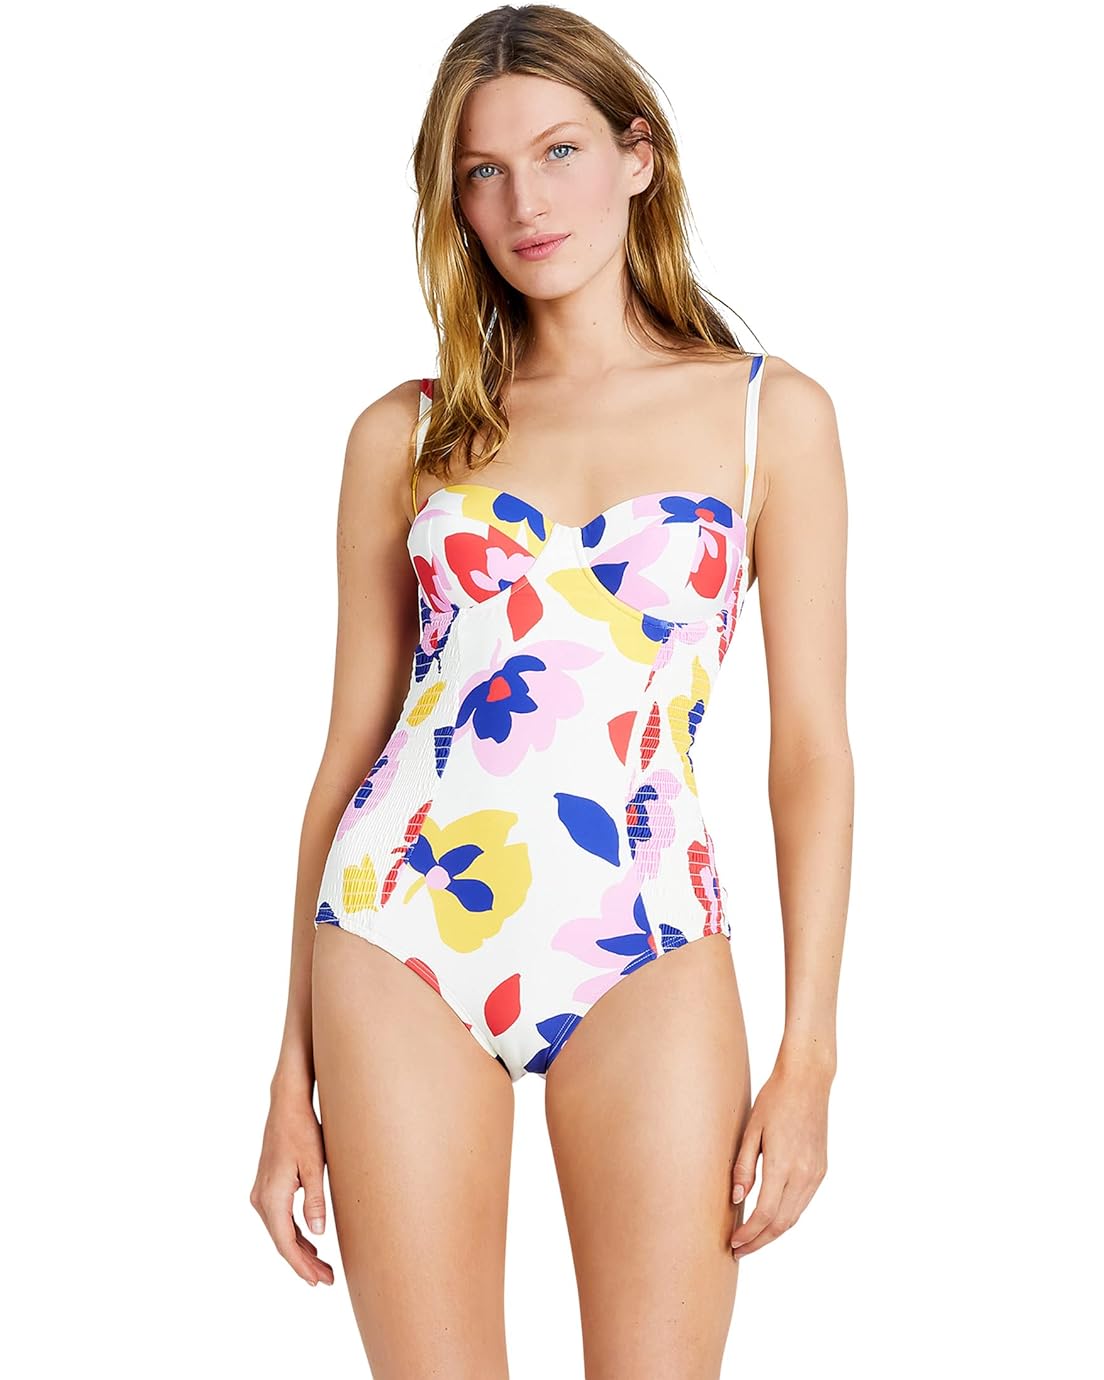 Kate Spade New York Summer Floral Smocked Underwire One-Piece